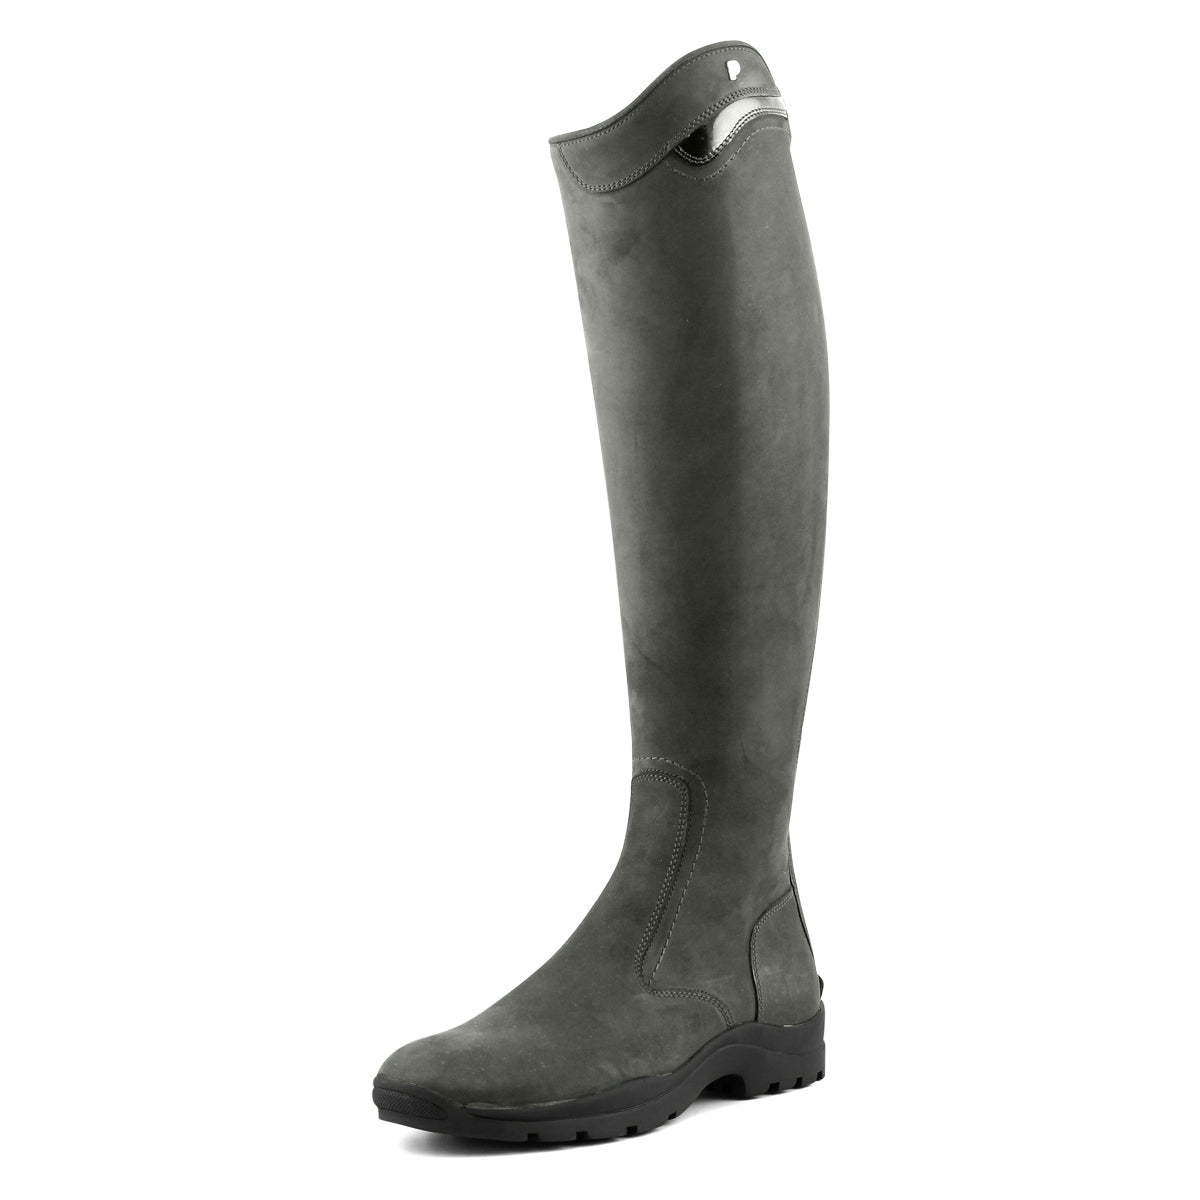 Petrie Explorer Riding Boots - Equestrian Fashion Outfitters